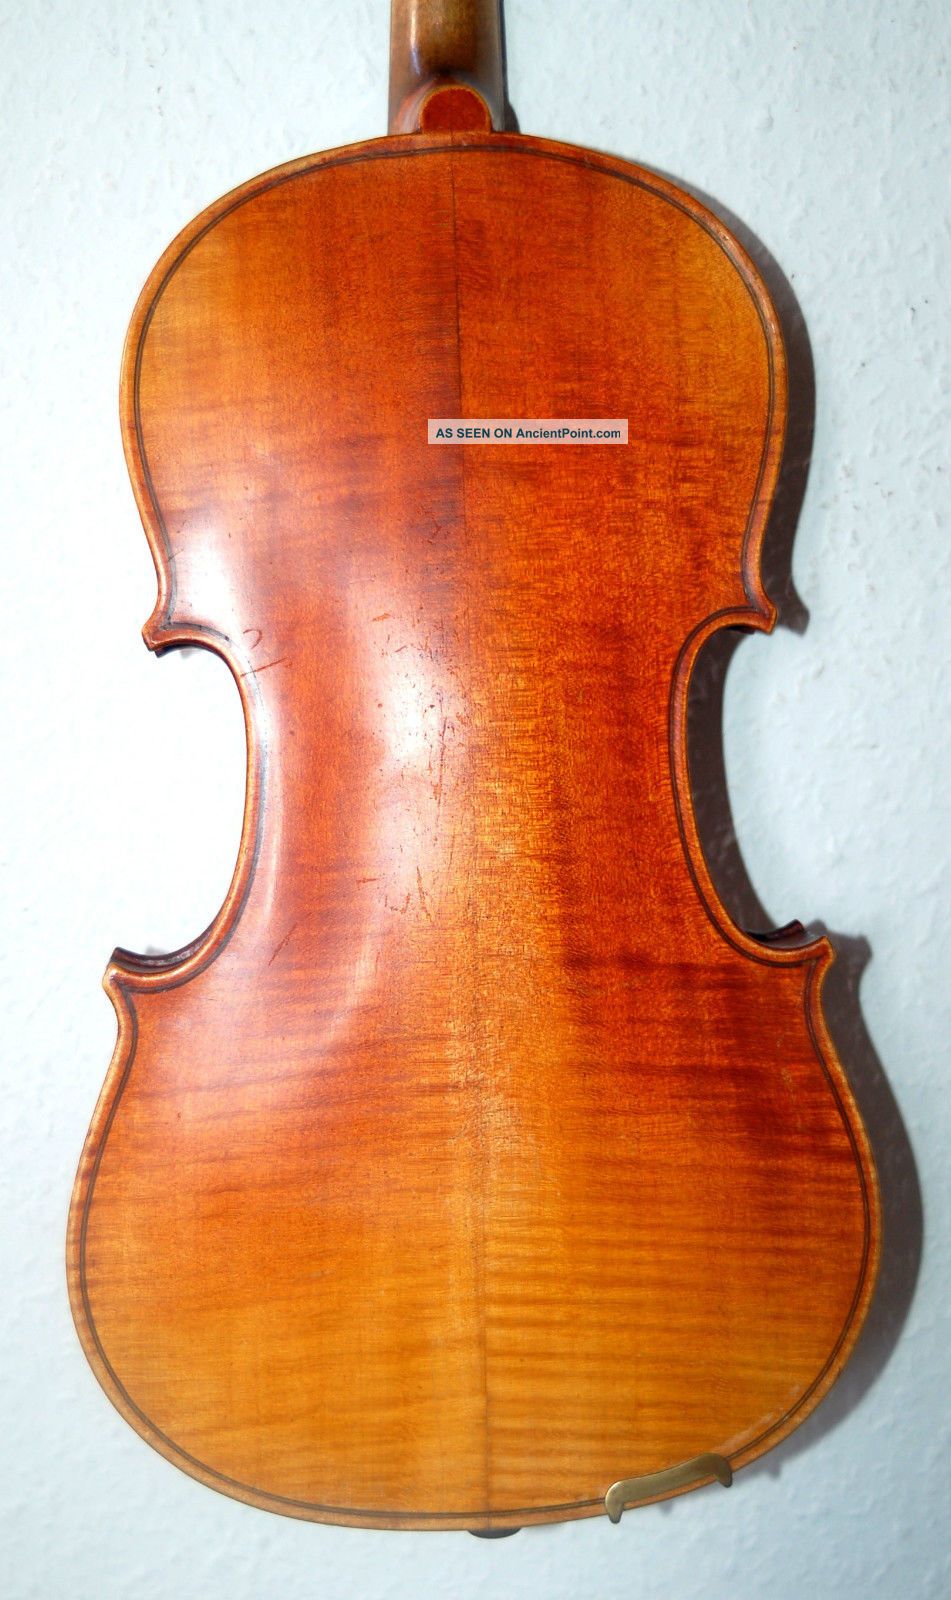 Antique Handmade German 4/4 Fullsize Violin - About 90 Years Old String photo